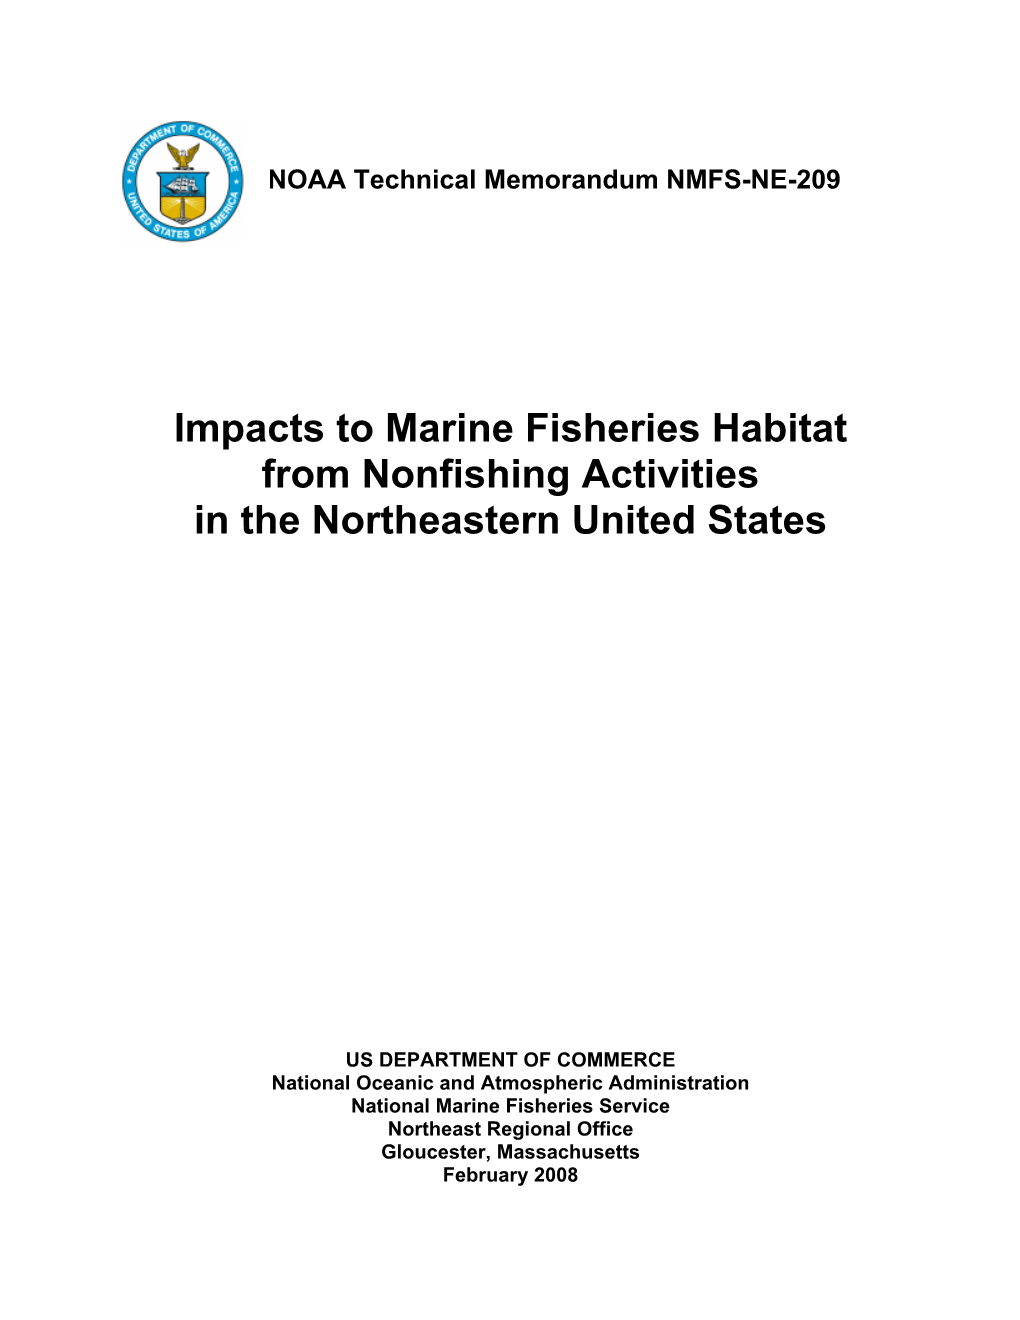 Impacts to Marine Fisheries Habitat from Nonfishing Activities in the Northeastern United States